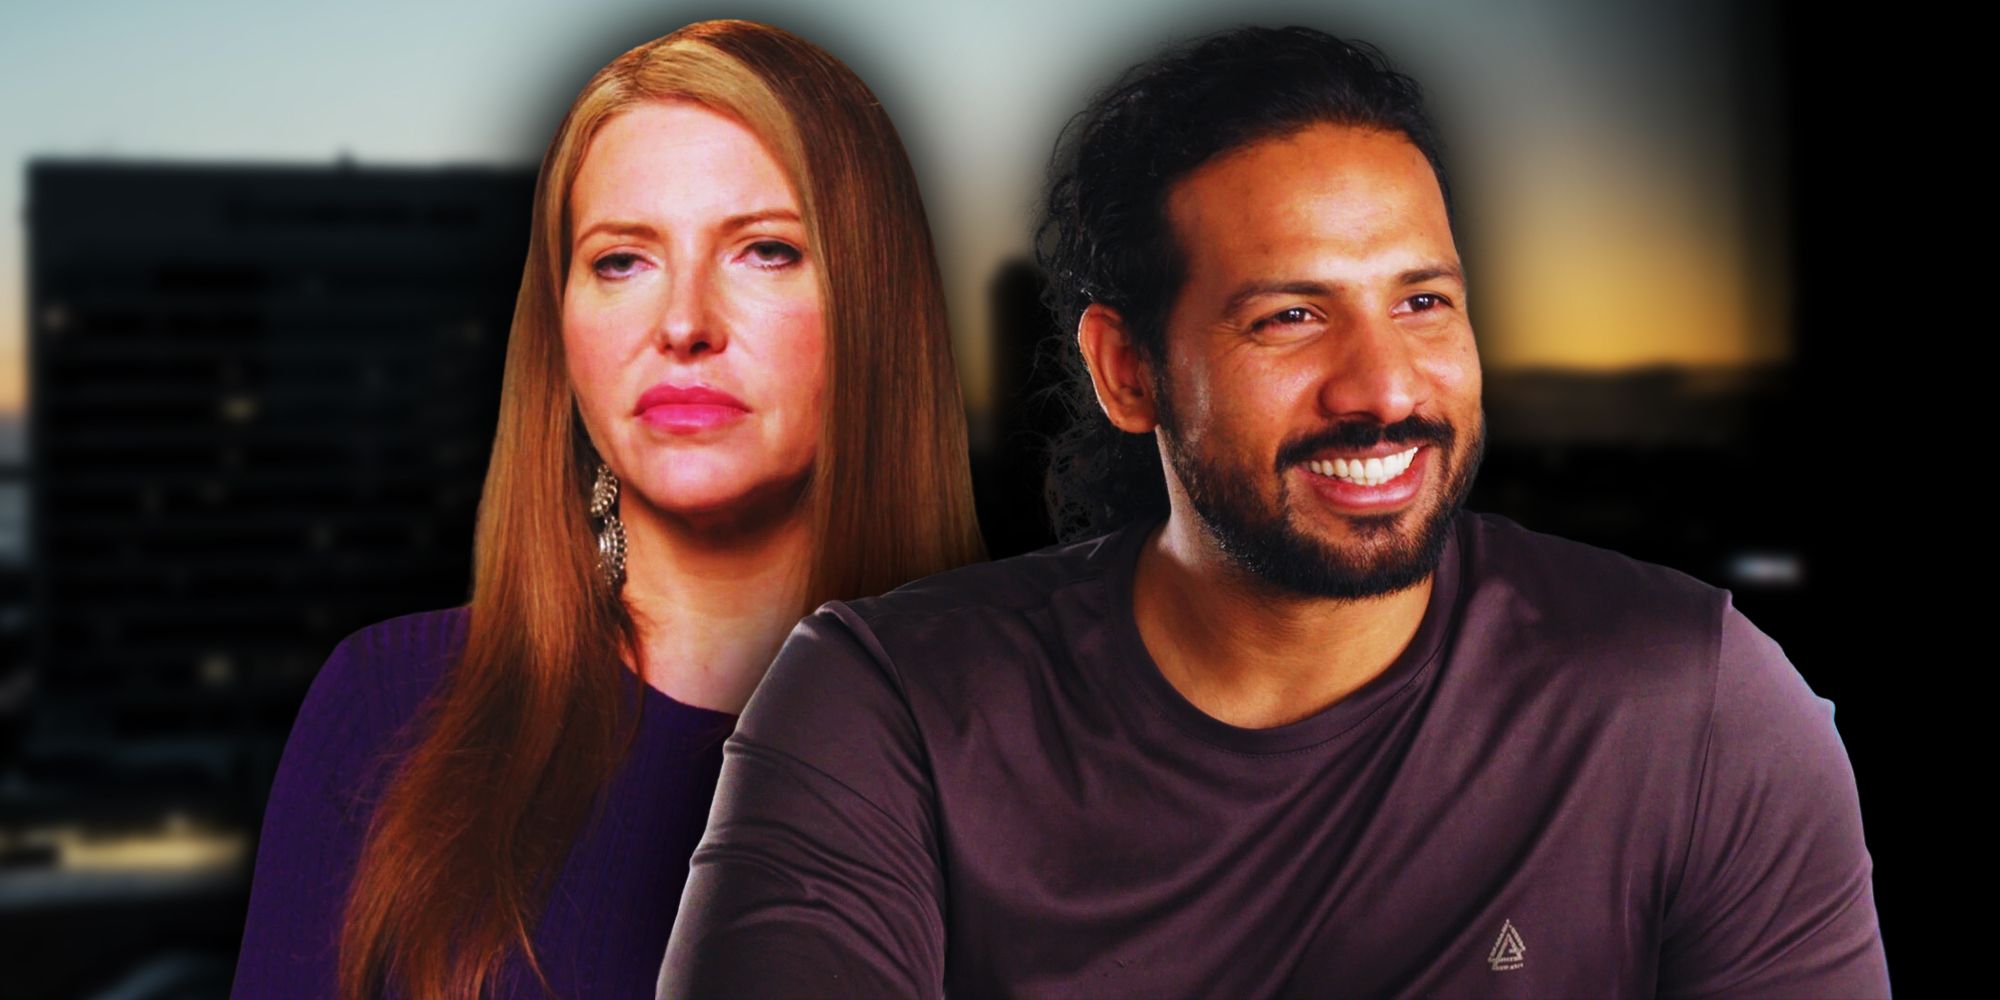 jen boecher rishi singh montage her sad him smiling 90 day fiance the other way